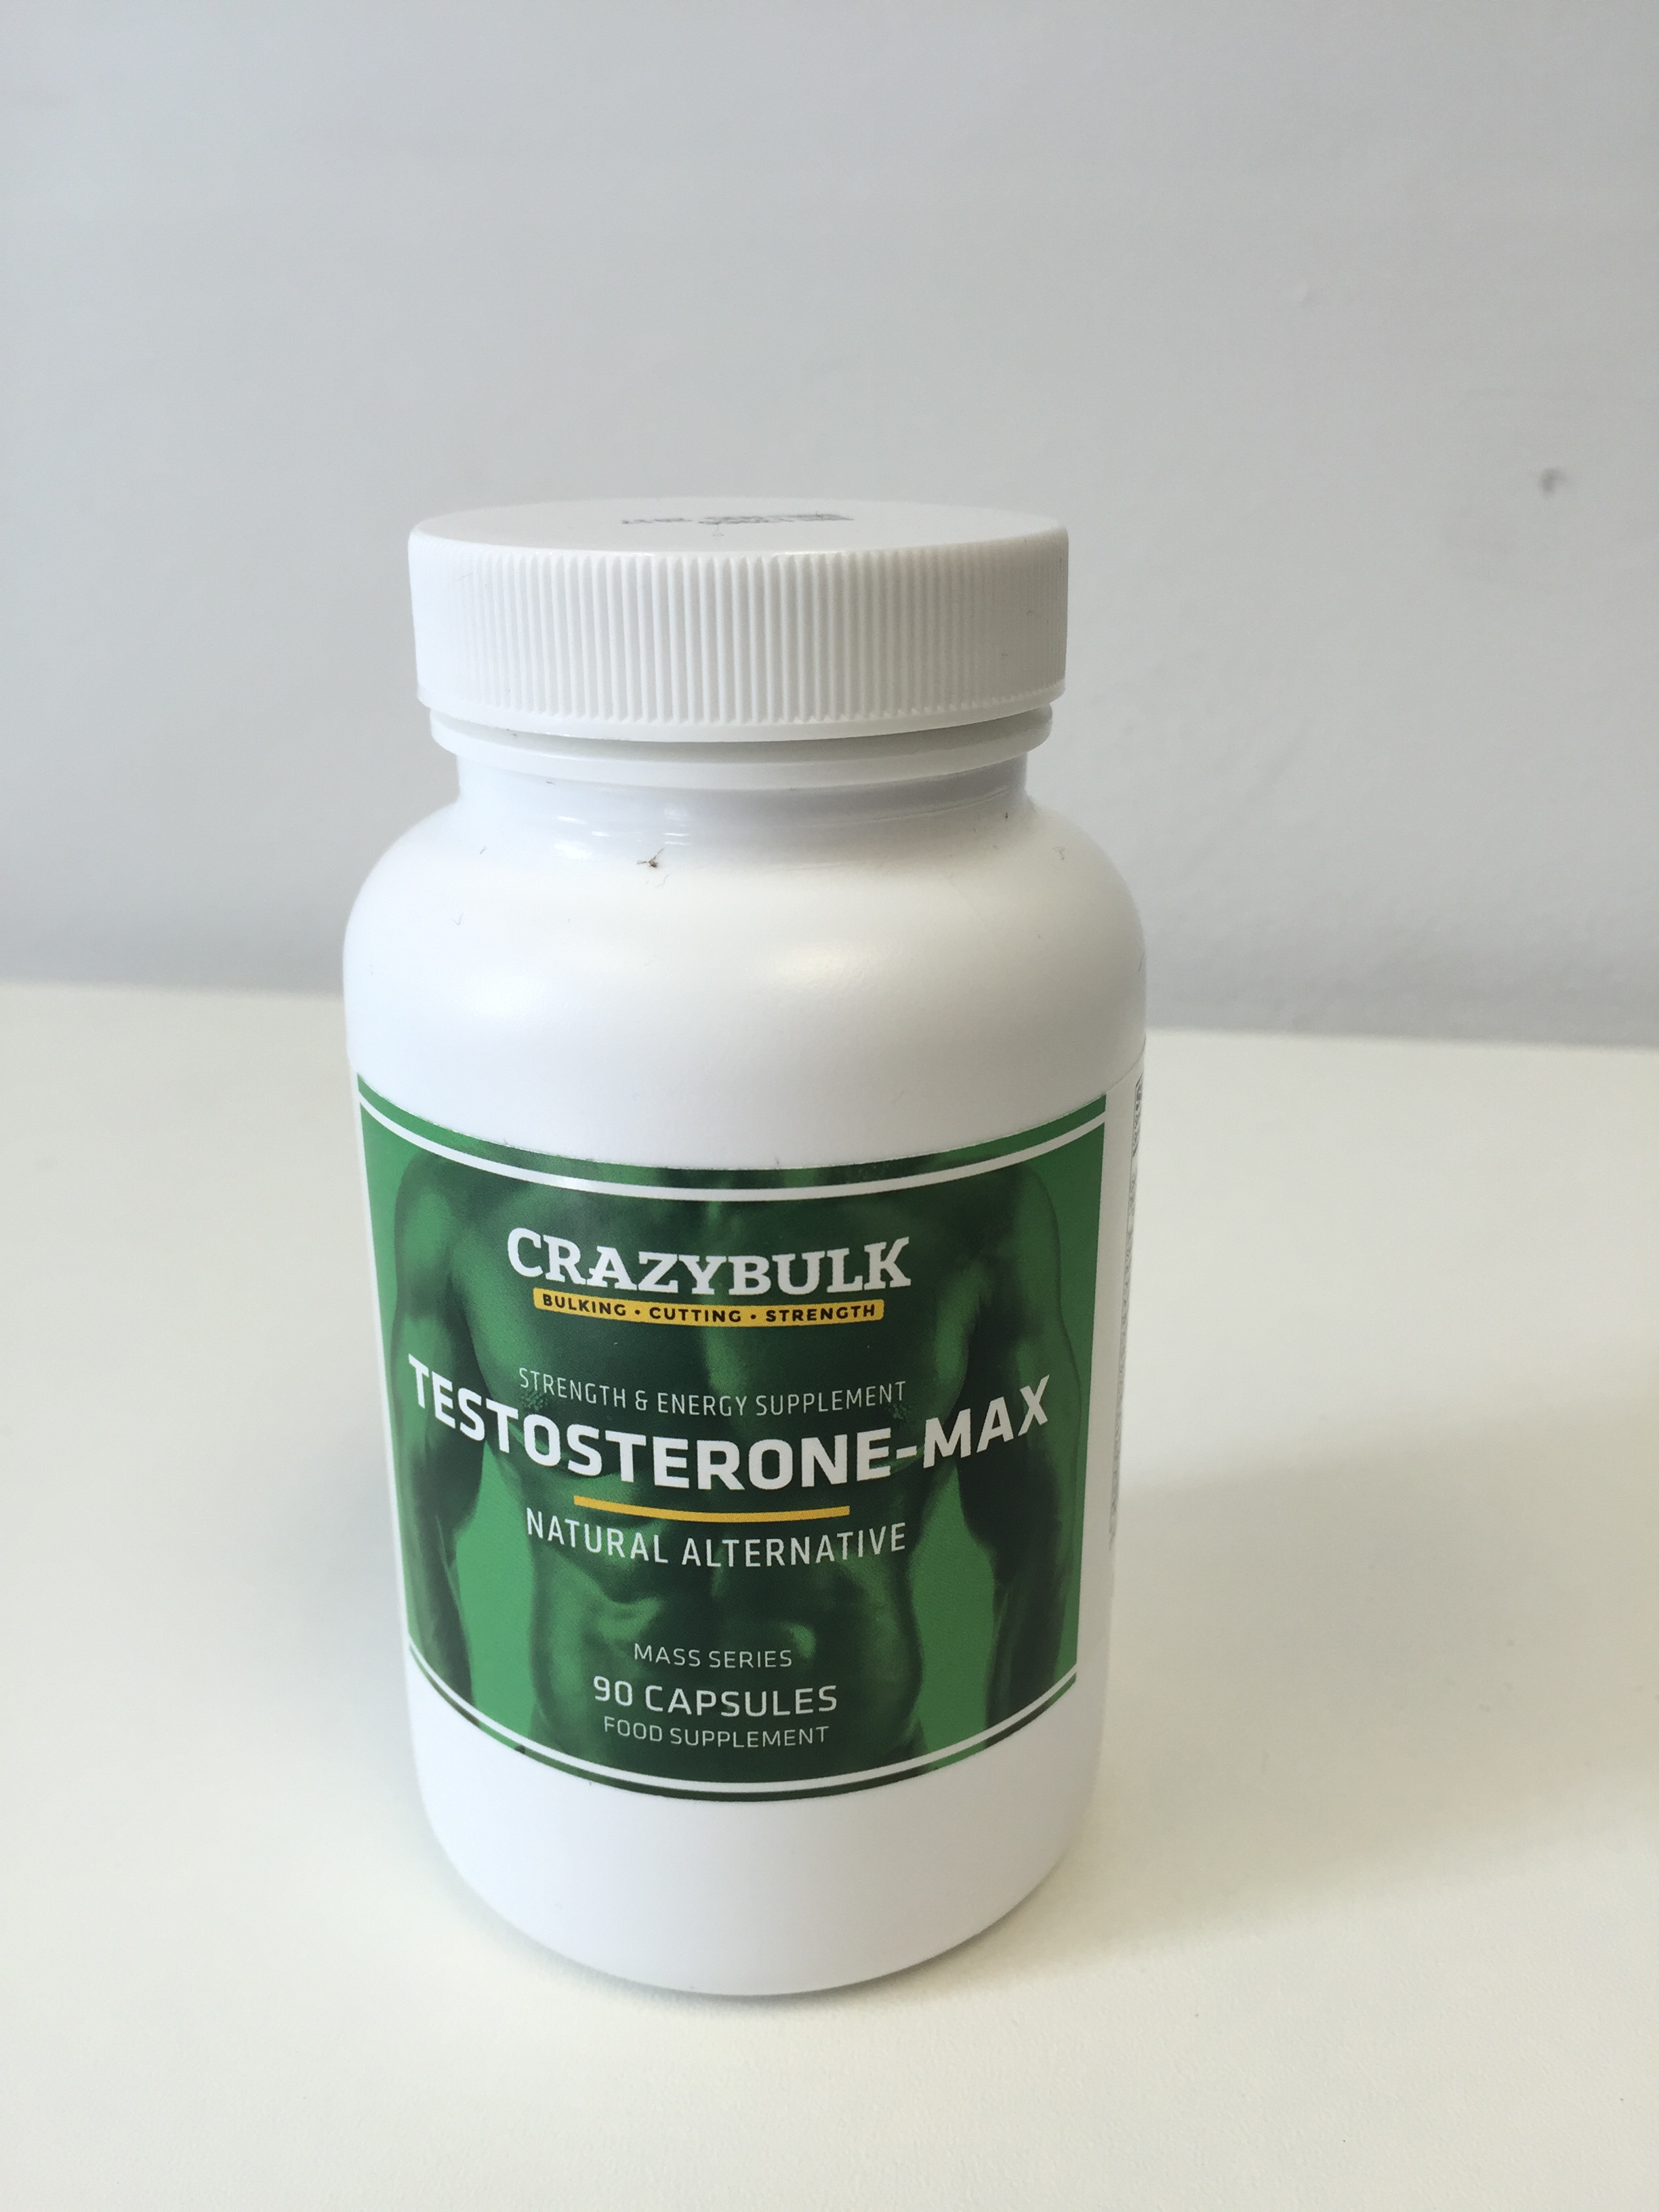 Is prednisone good for weight loss